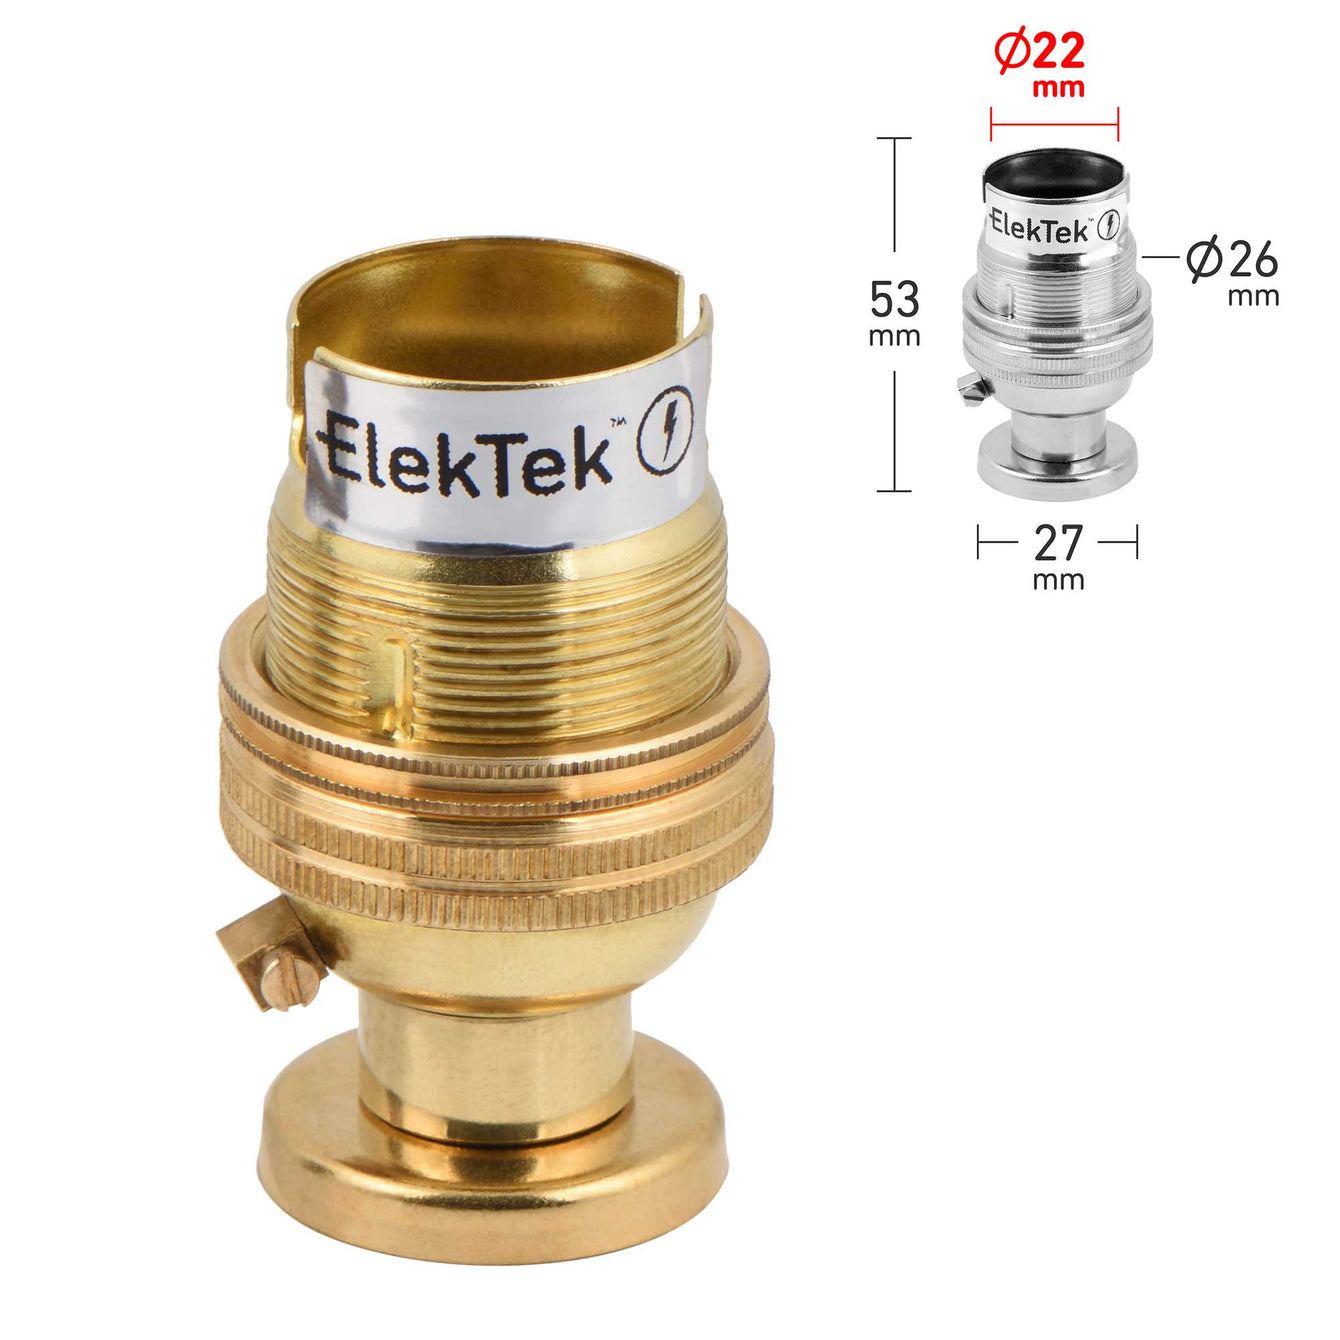 ElekTek Lamp Holder Half Inch Bayonet Cap B22 Unswitched With Shade Ring Back Plate Cover and Screws Solid Brass - Buy It Better Antique Brass